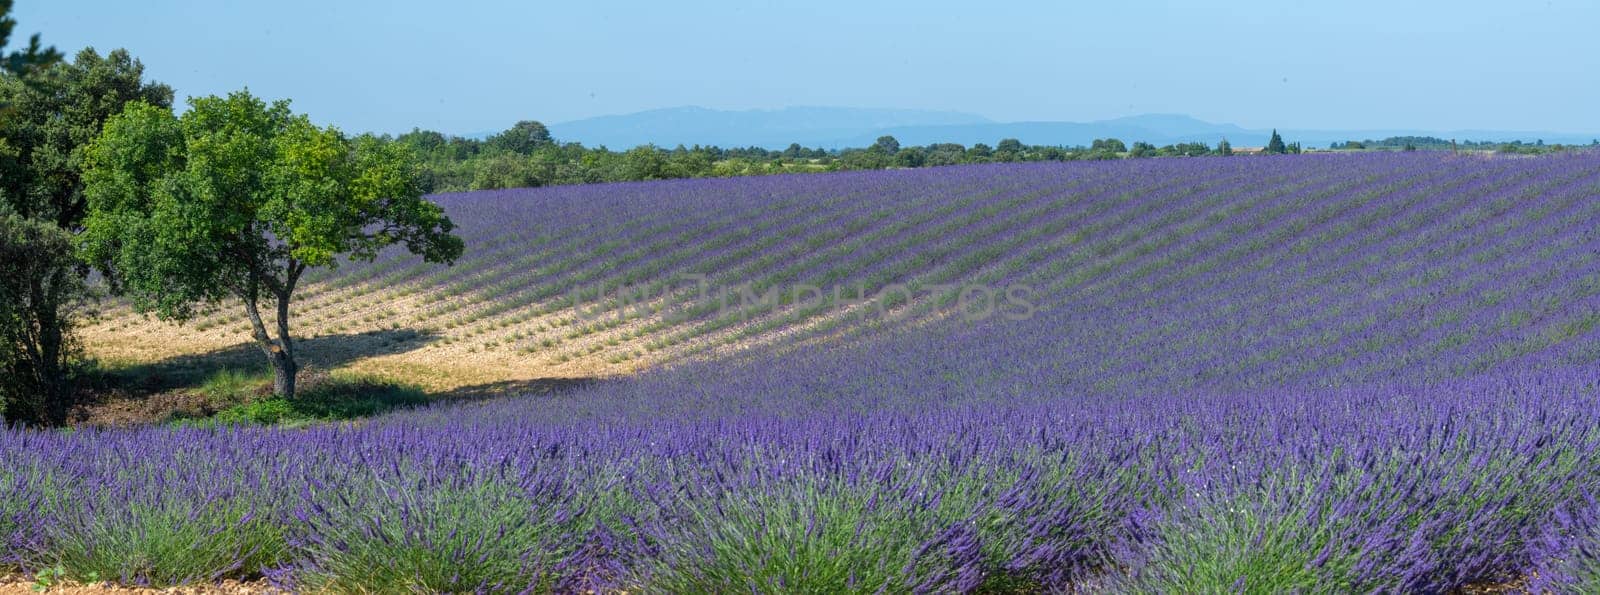 Provence, Lavender field at sunset, Valensole Plateau Provence France, blooming lavender fields, Europe by FreeProd